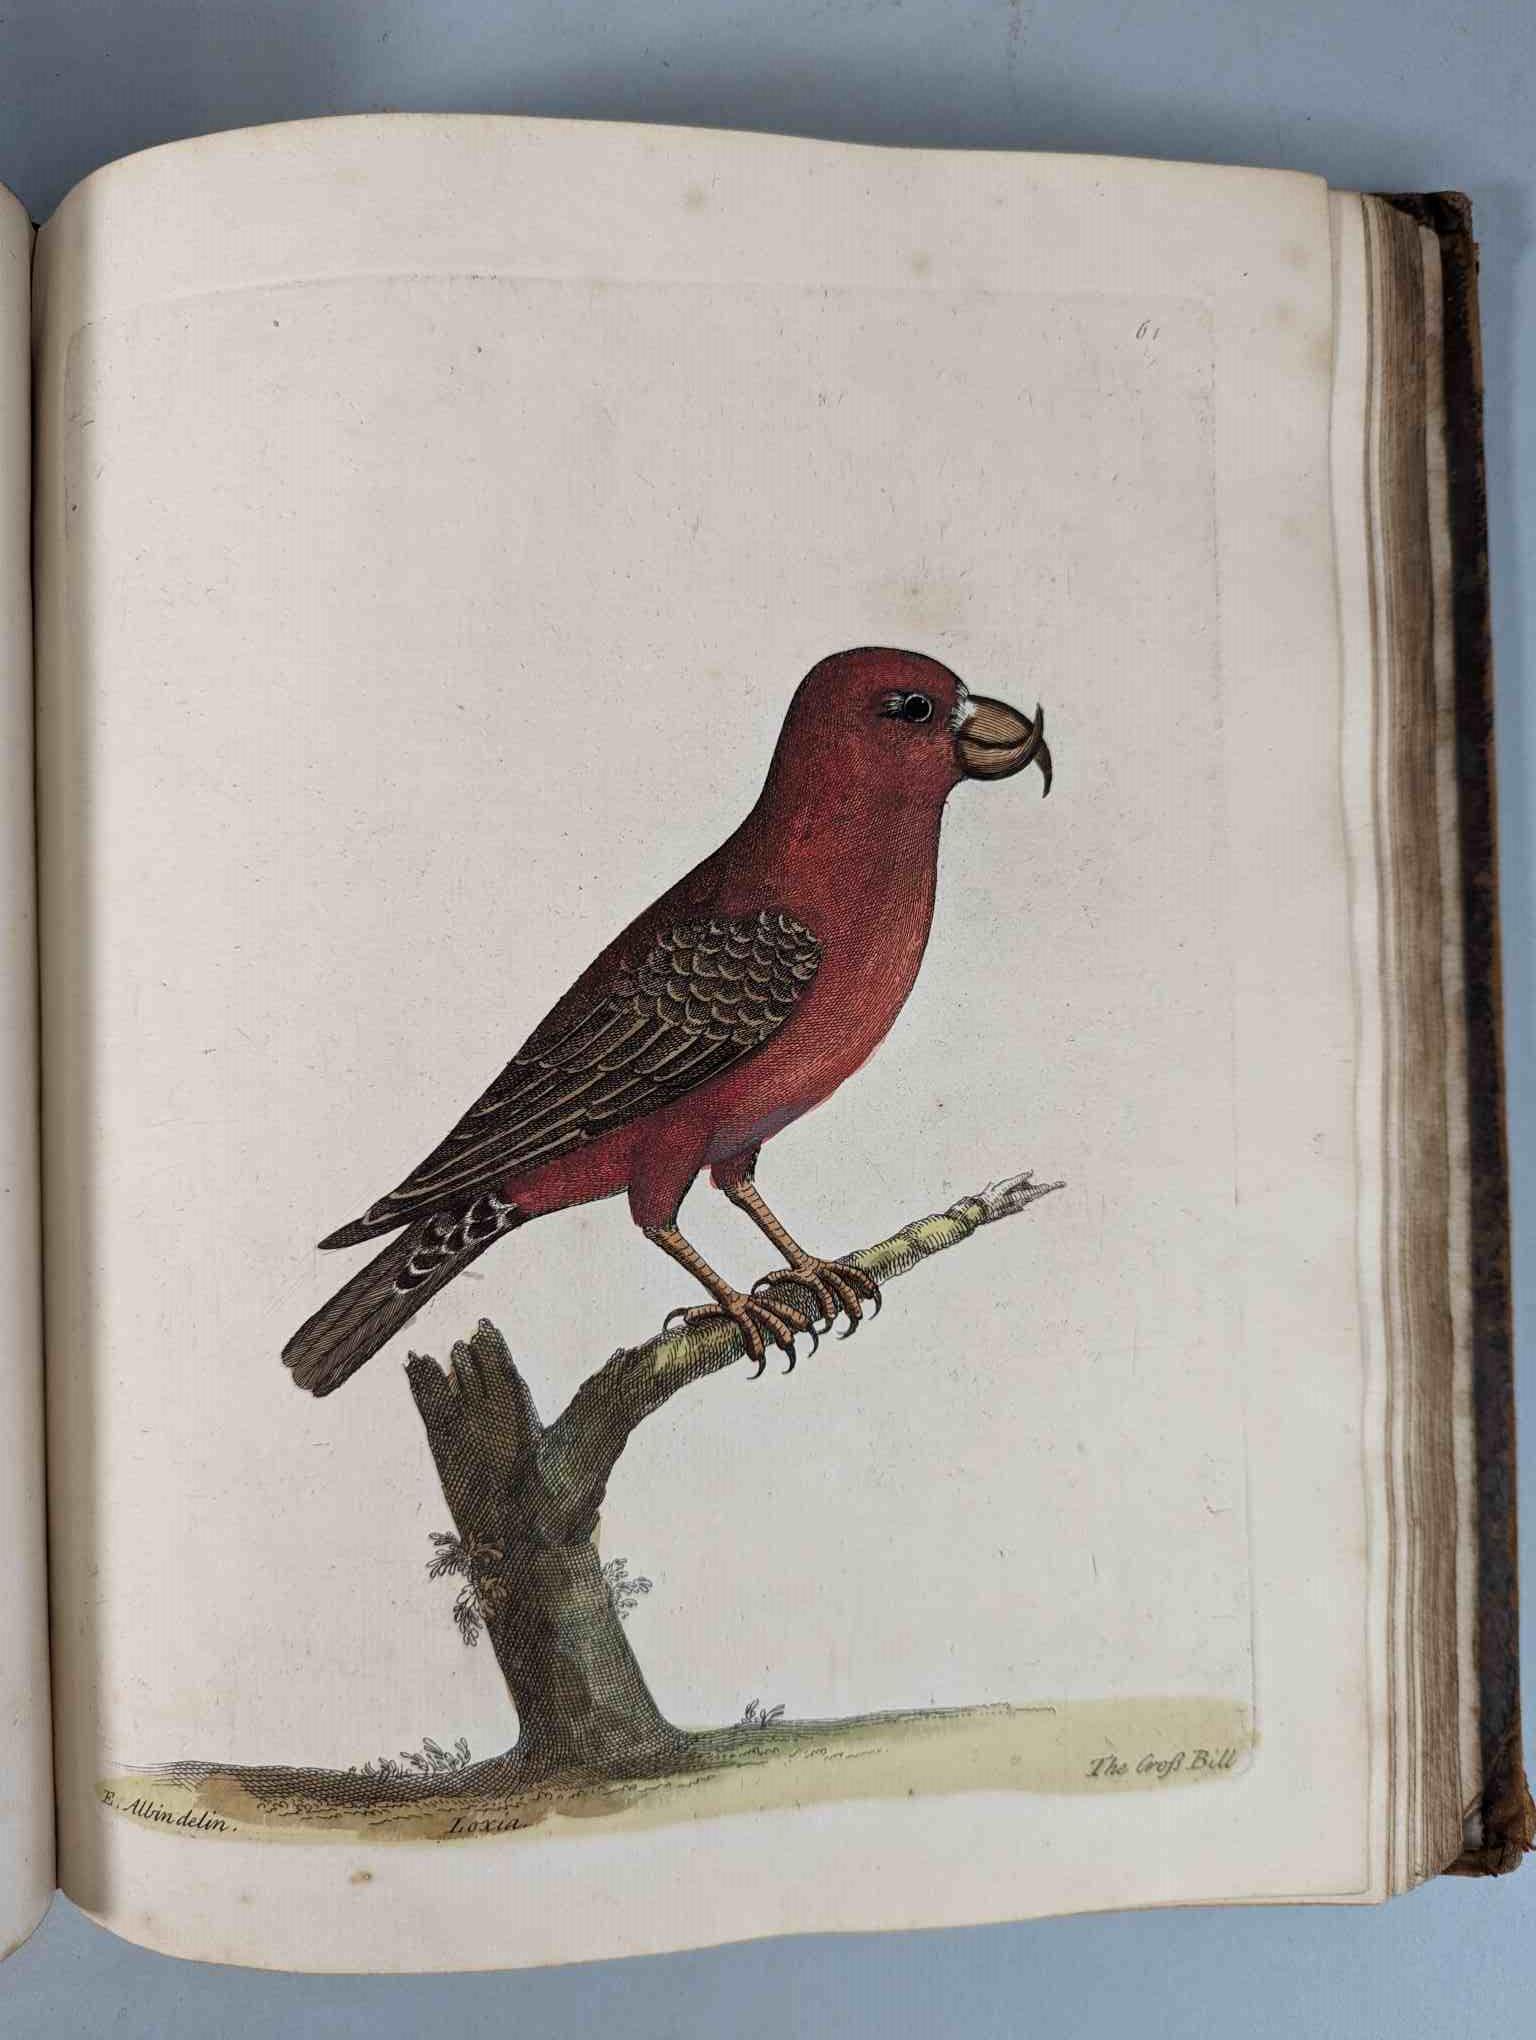 ALBIN, Eleazar. A Natural History of Birds, to which are added, Notes and Observations by W. - Image 64 of 208